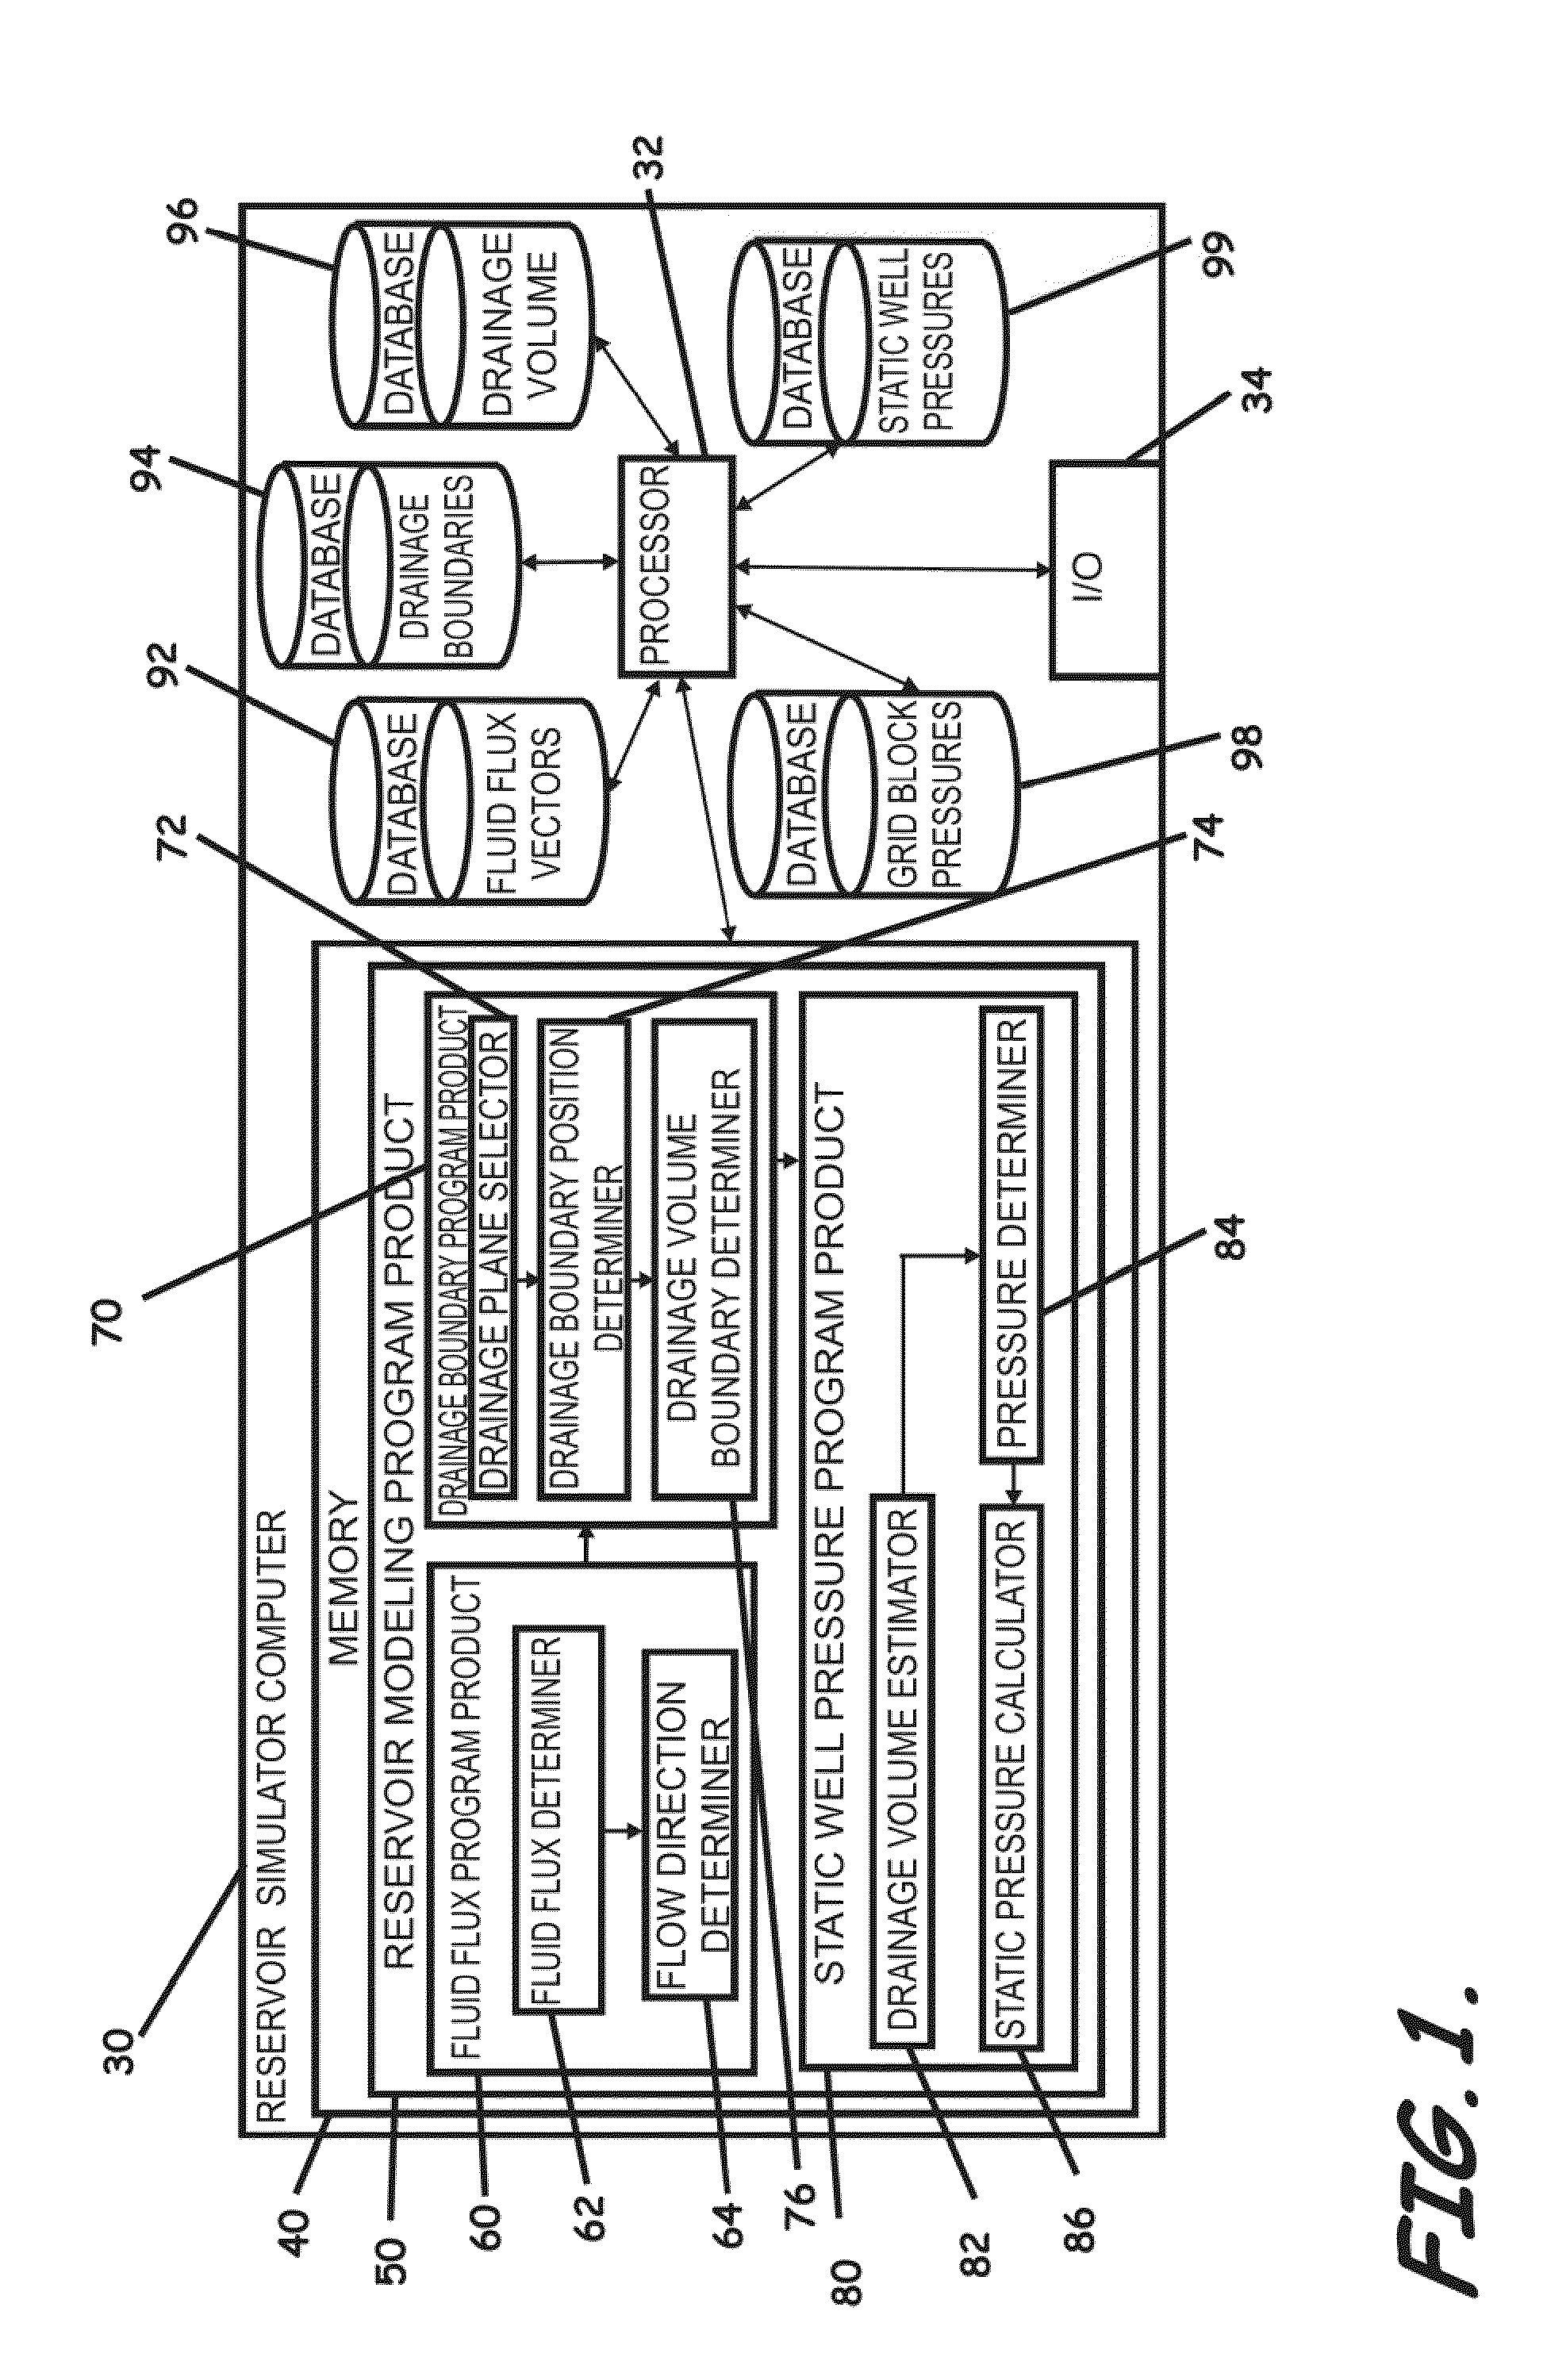 Systems, Computer Implemented Methods, and Computer Readable Program Products to Compute Approximate Well Drainage Pressure for a Reservoir Simulator